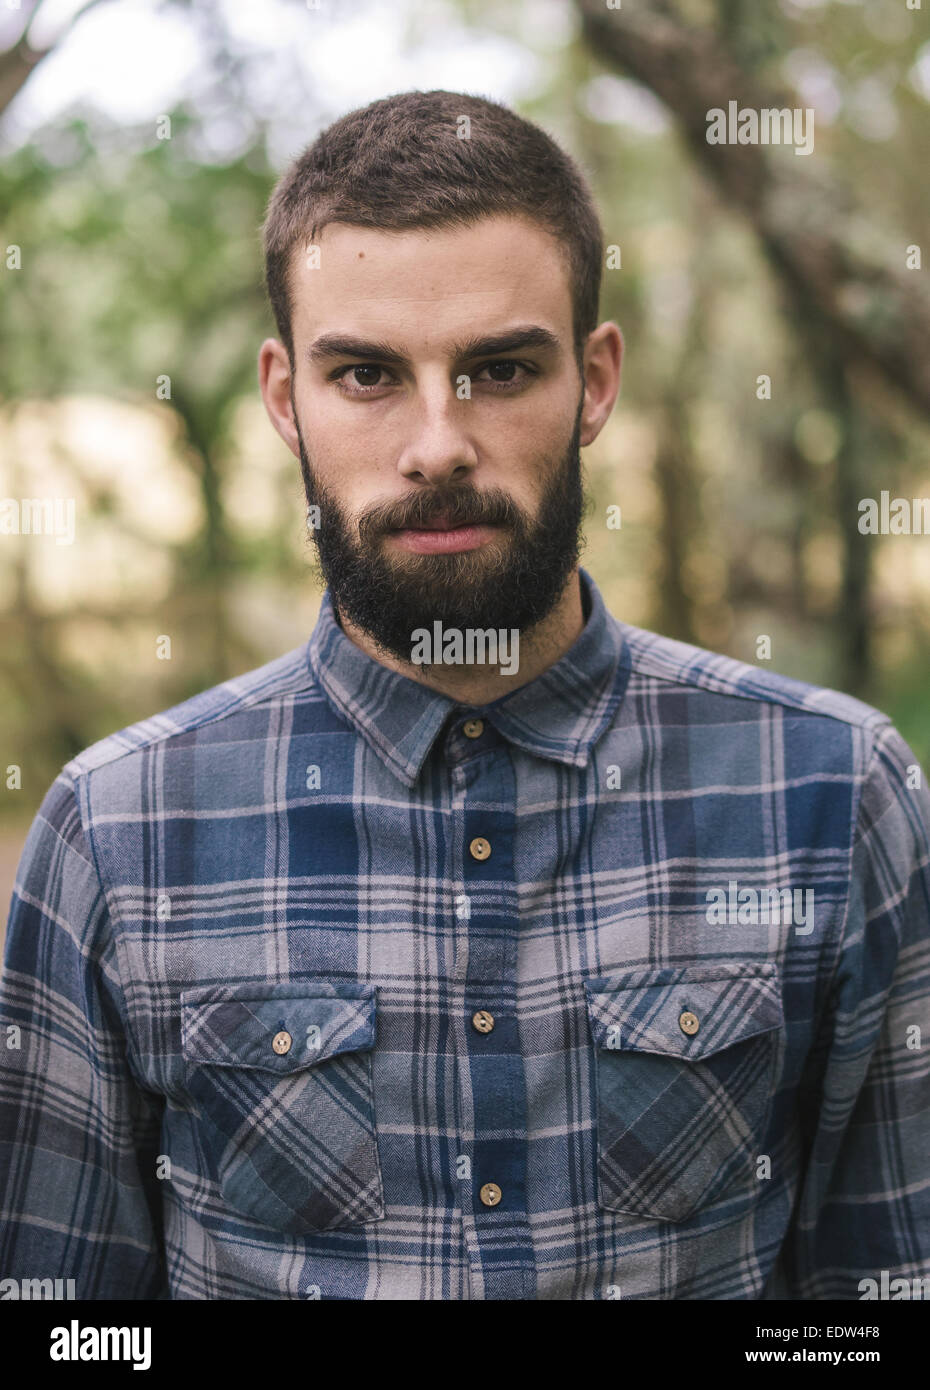 Hipster man portrait outdoors. Man is looking at camera. Stock Photo